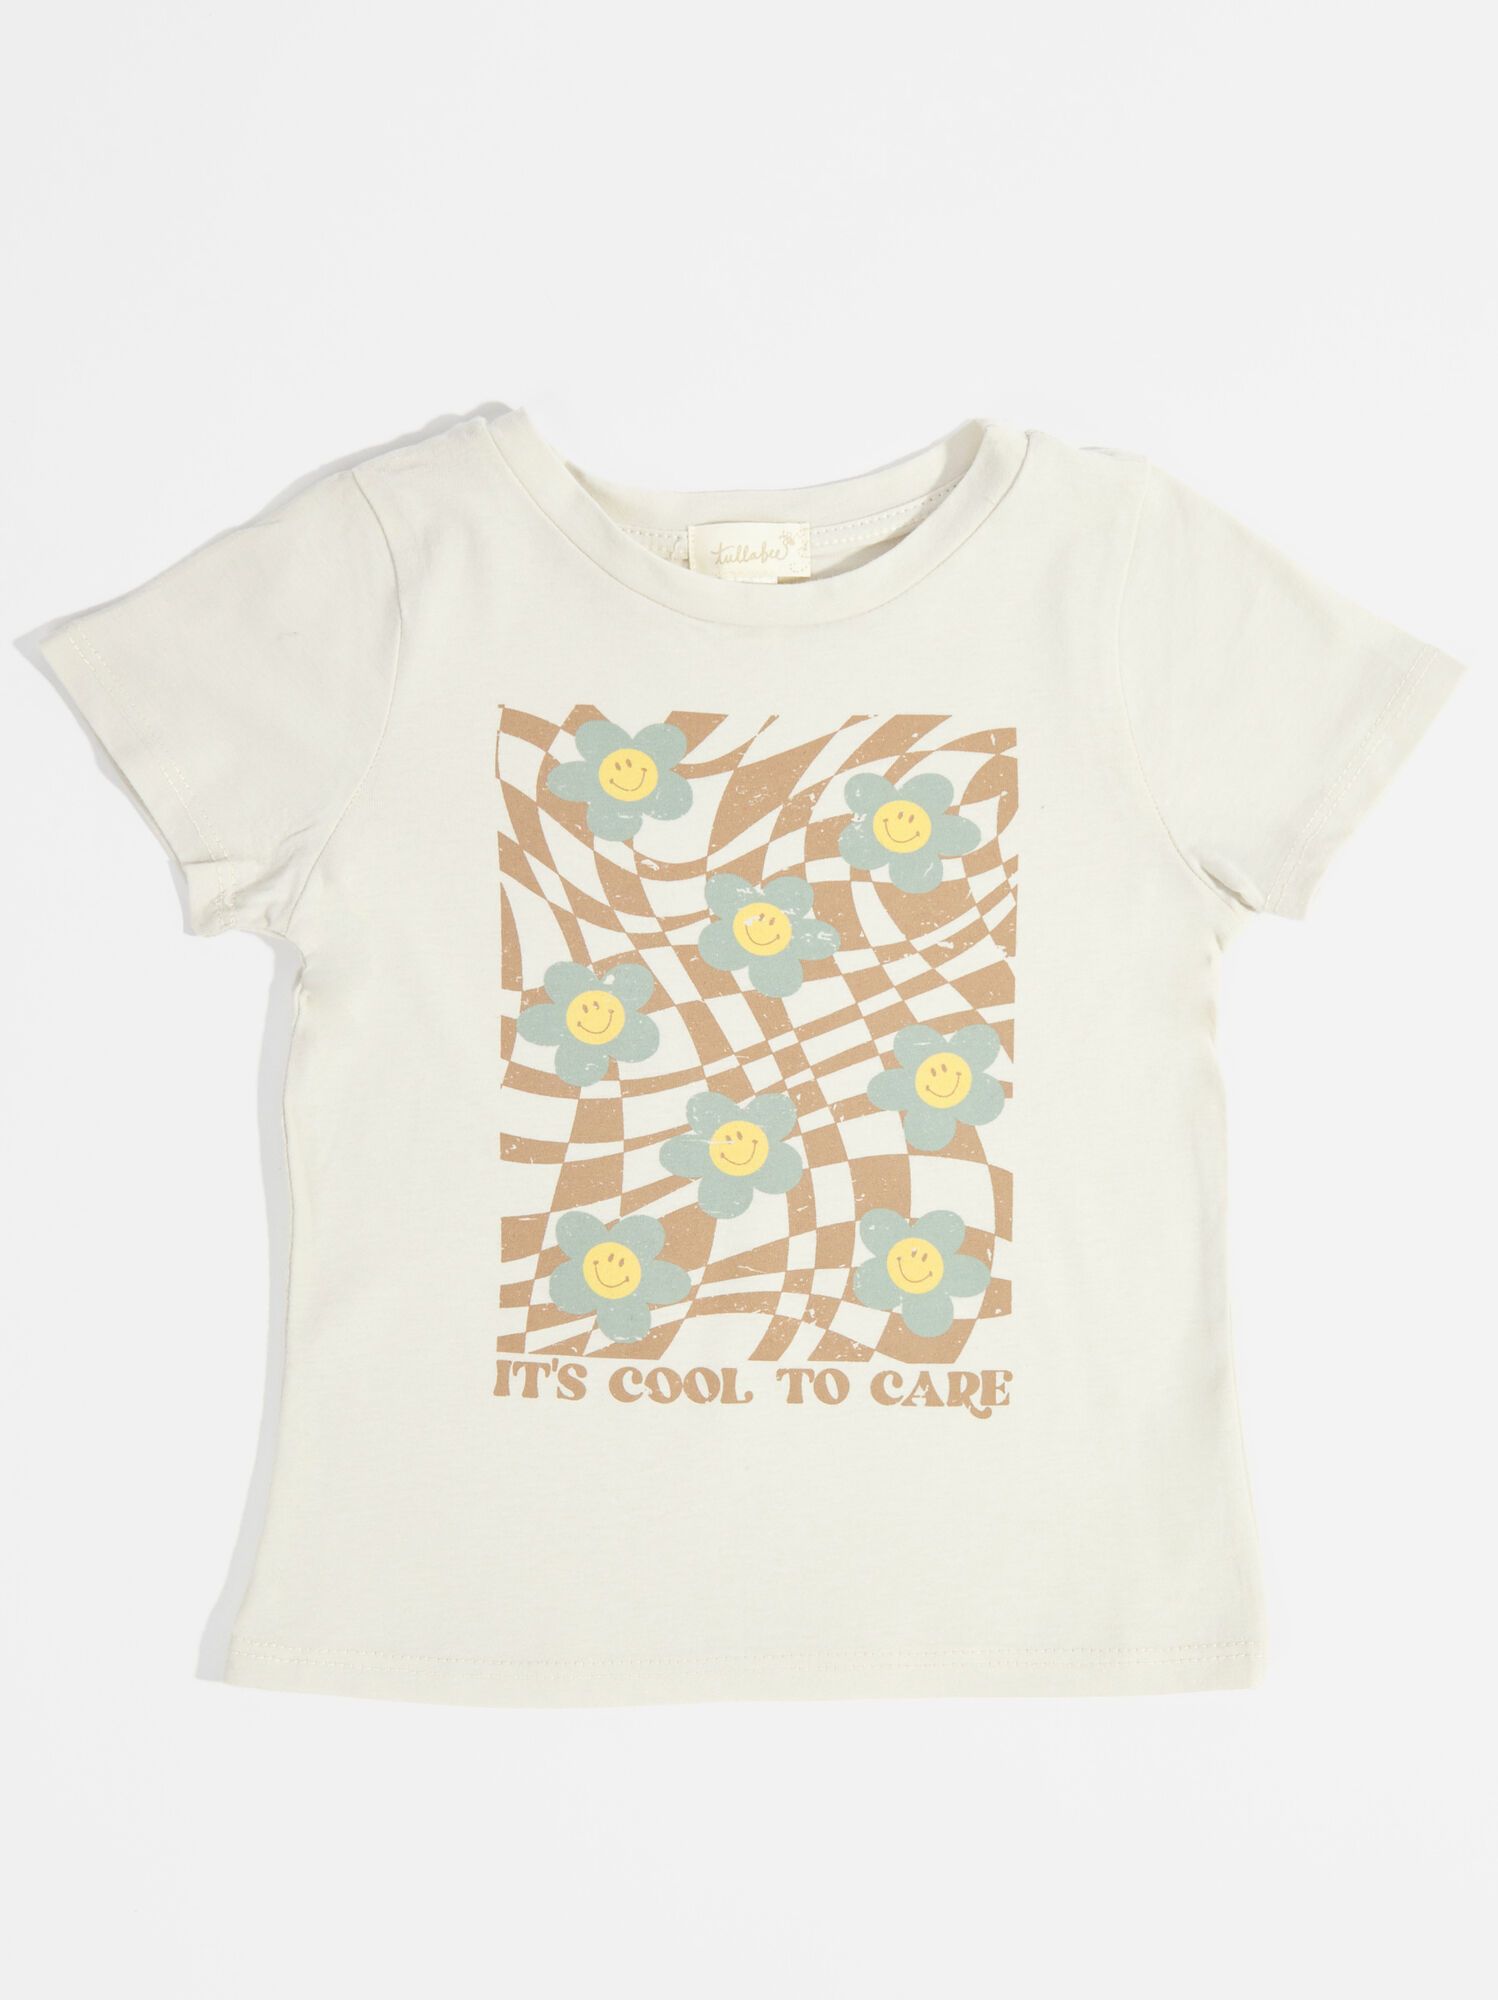 Tullabee Retro Cool To Care Graphic Tee | Altar'd State